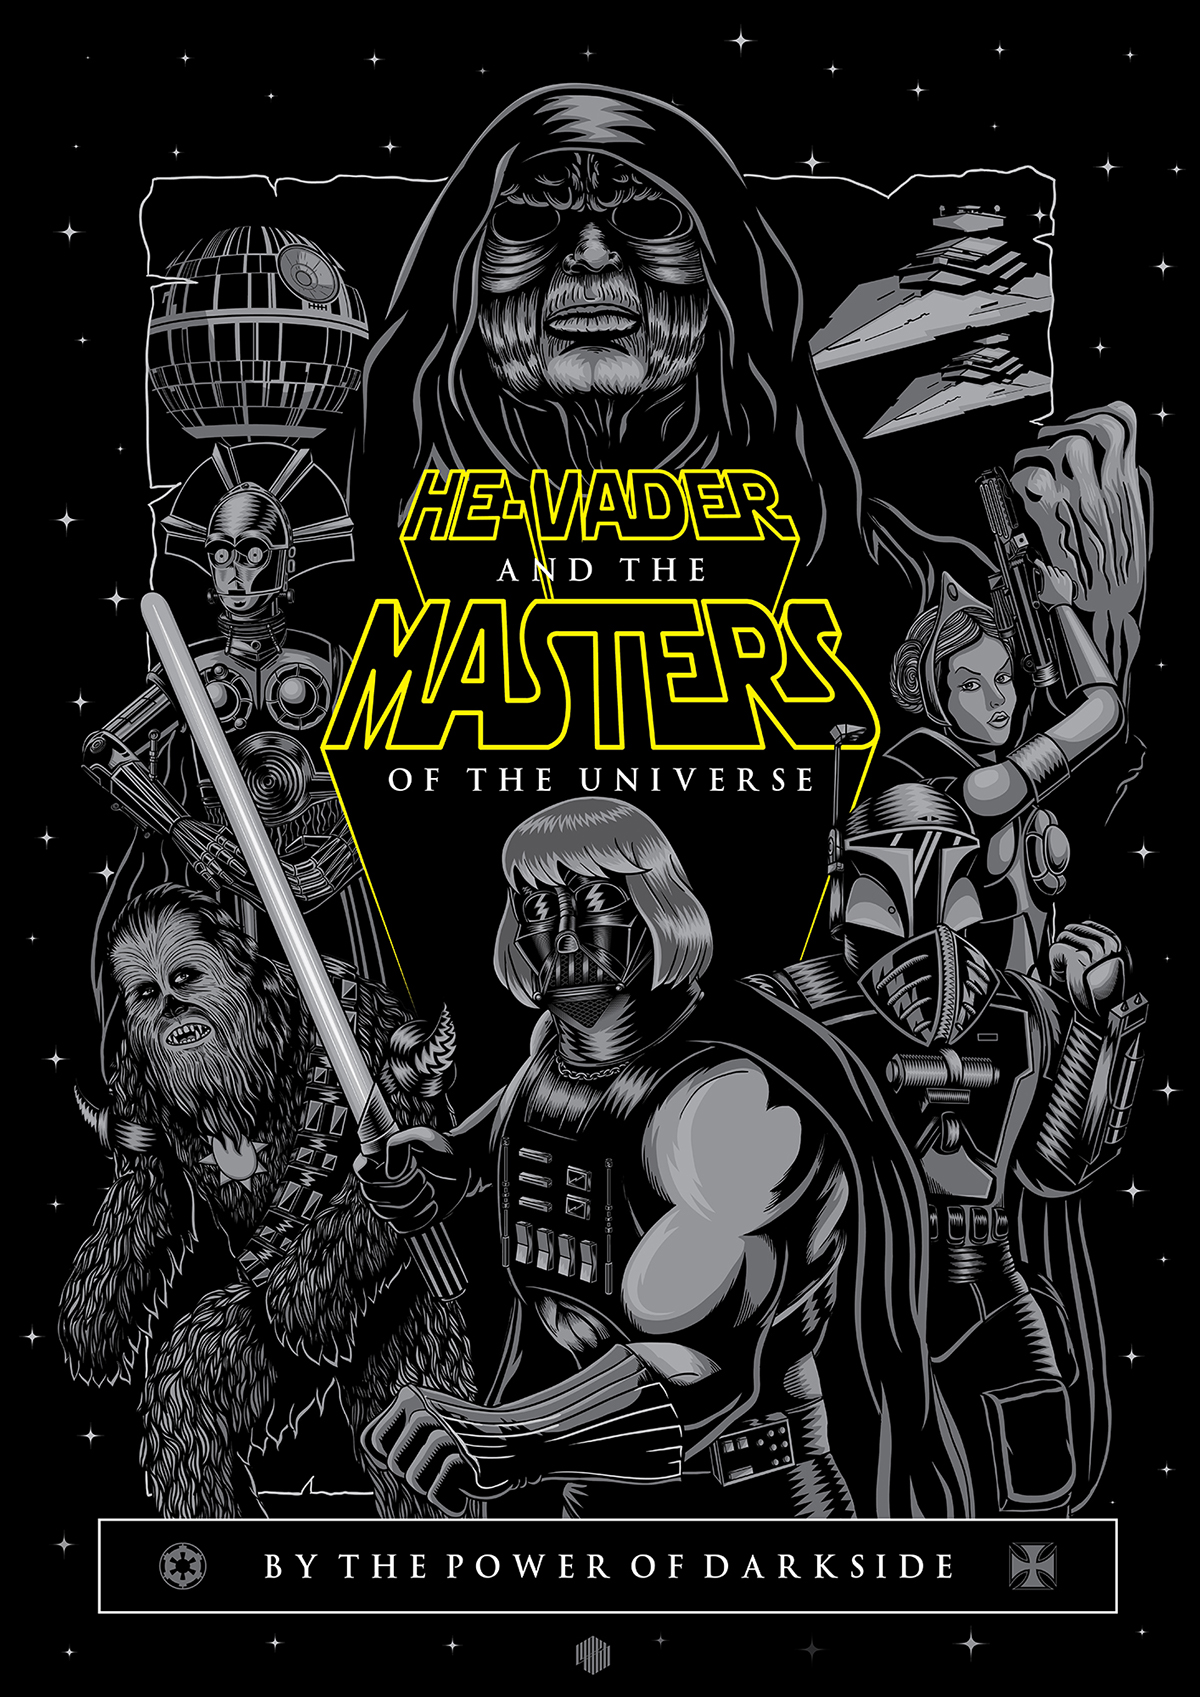 He-vader and the Masters of the universe on Behance